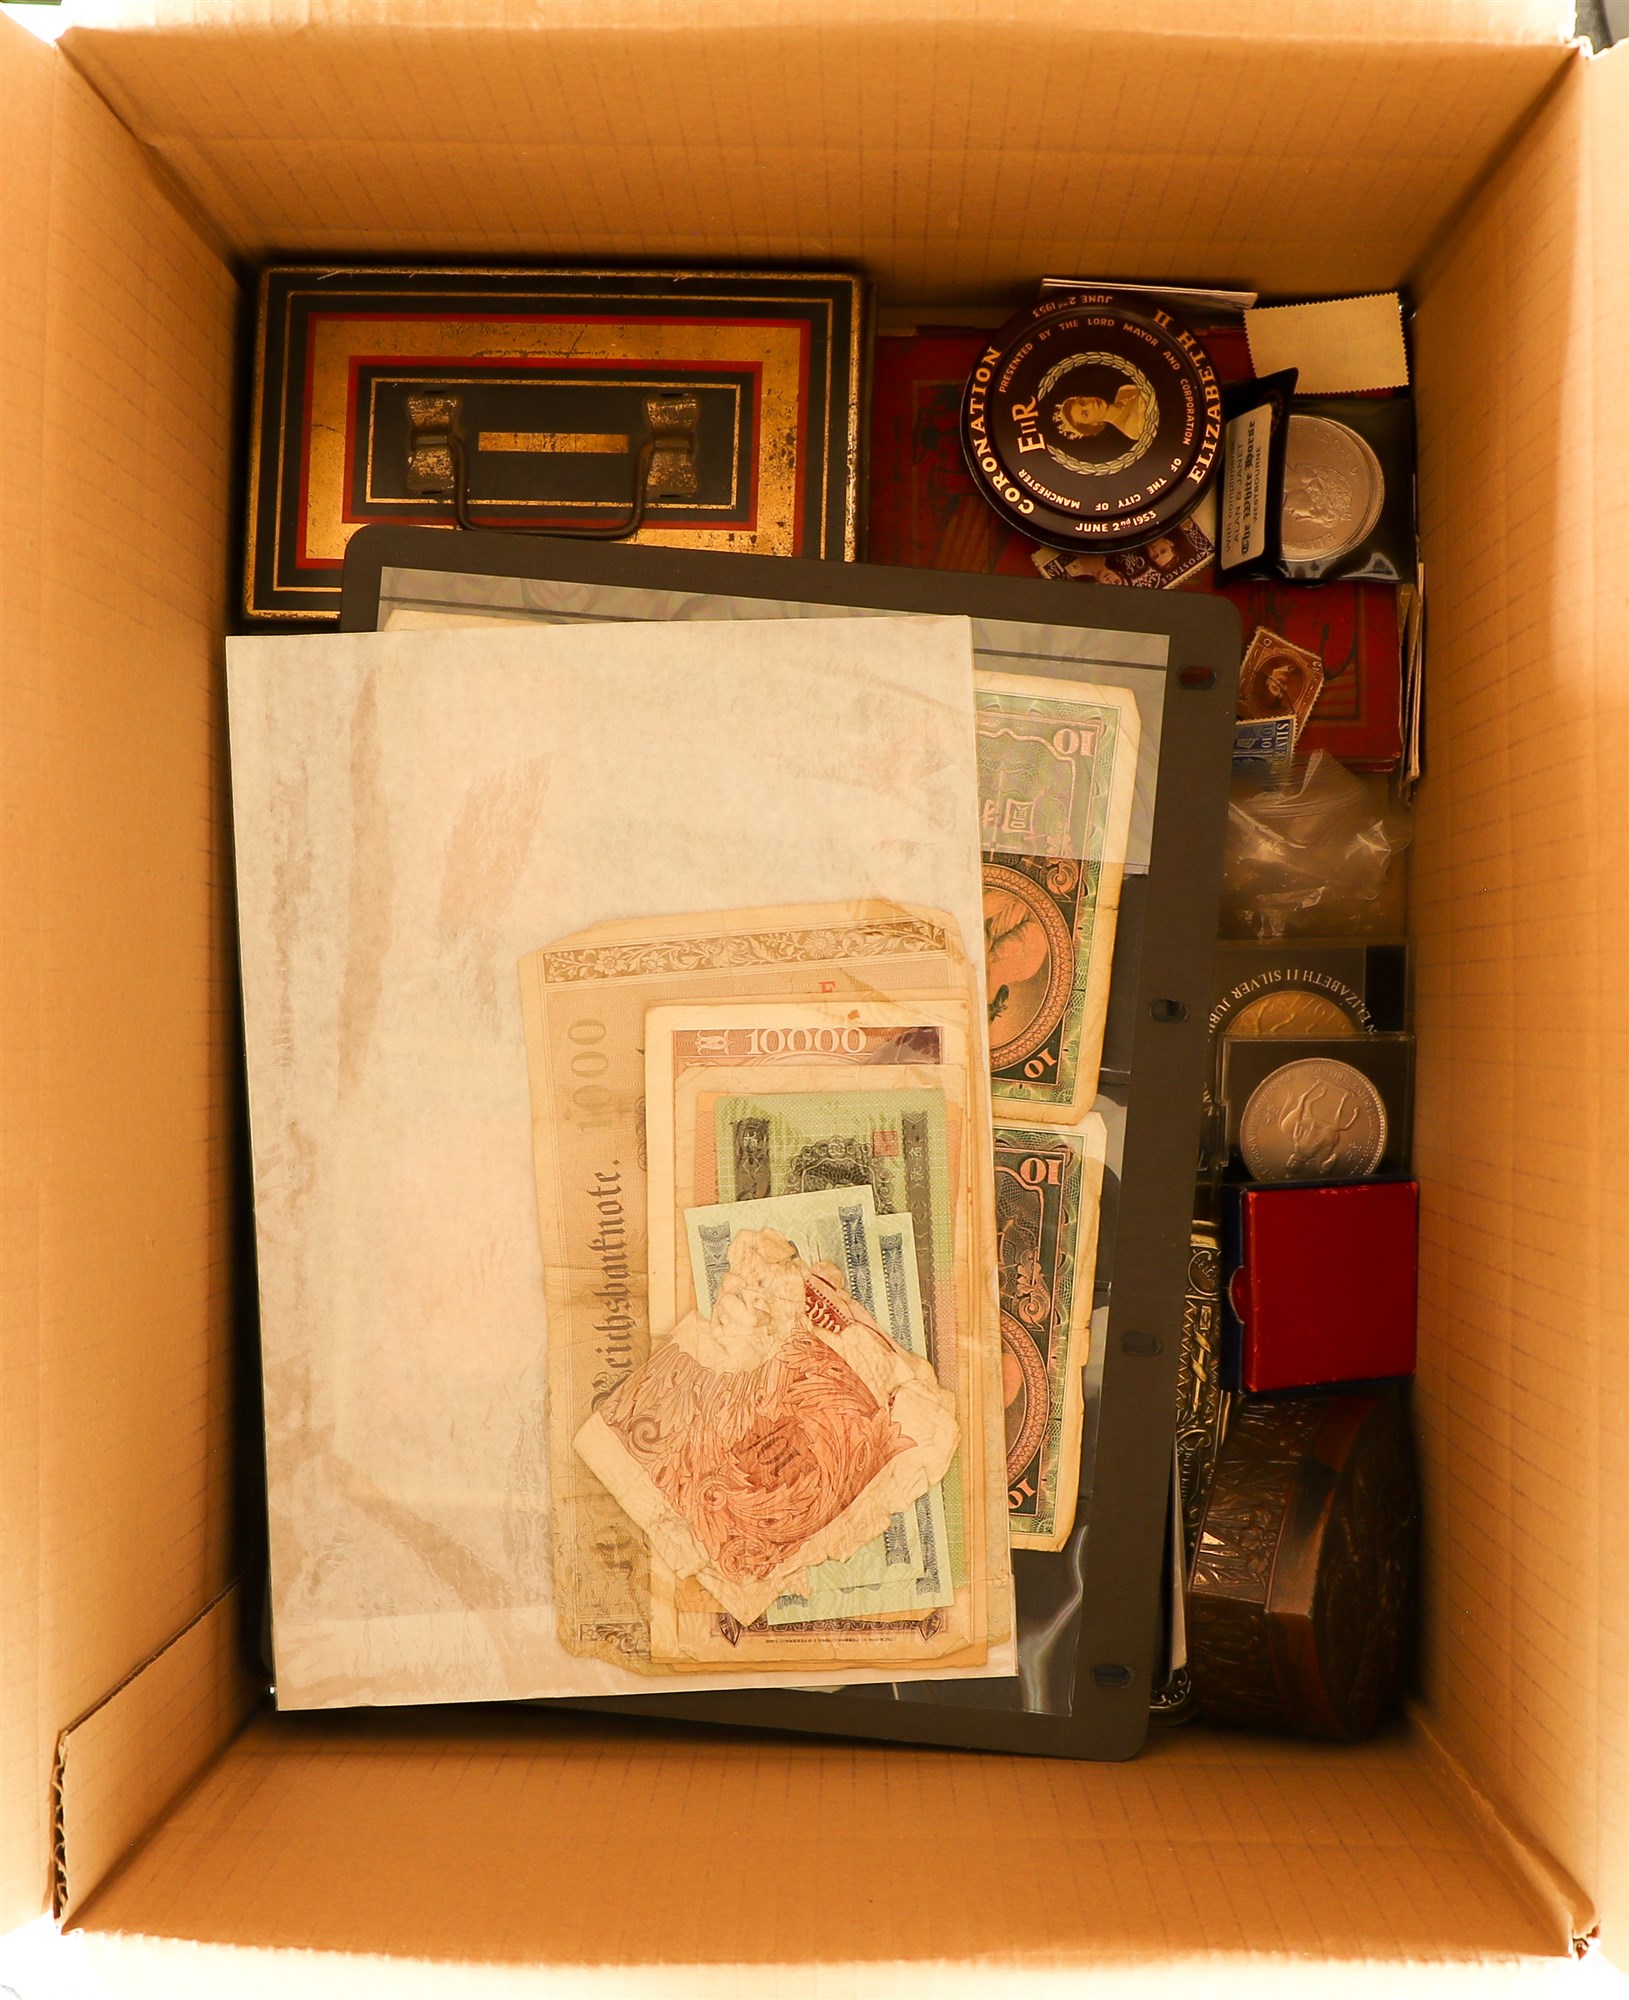 COINS, BANKNOTES, BADGES, MEDALS ETC with various coins in a tin, old banknotes incl. Hong Kong - Image 4 of 4